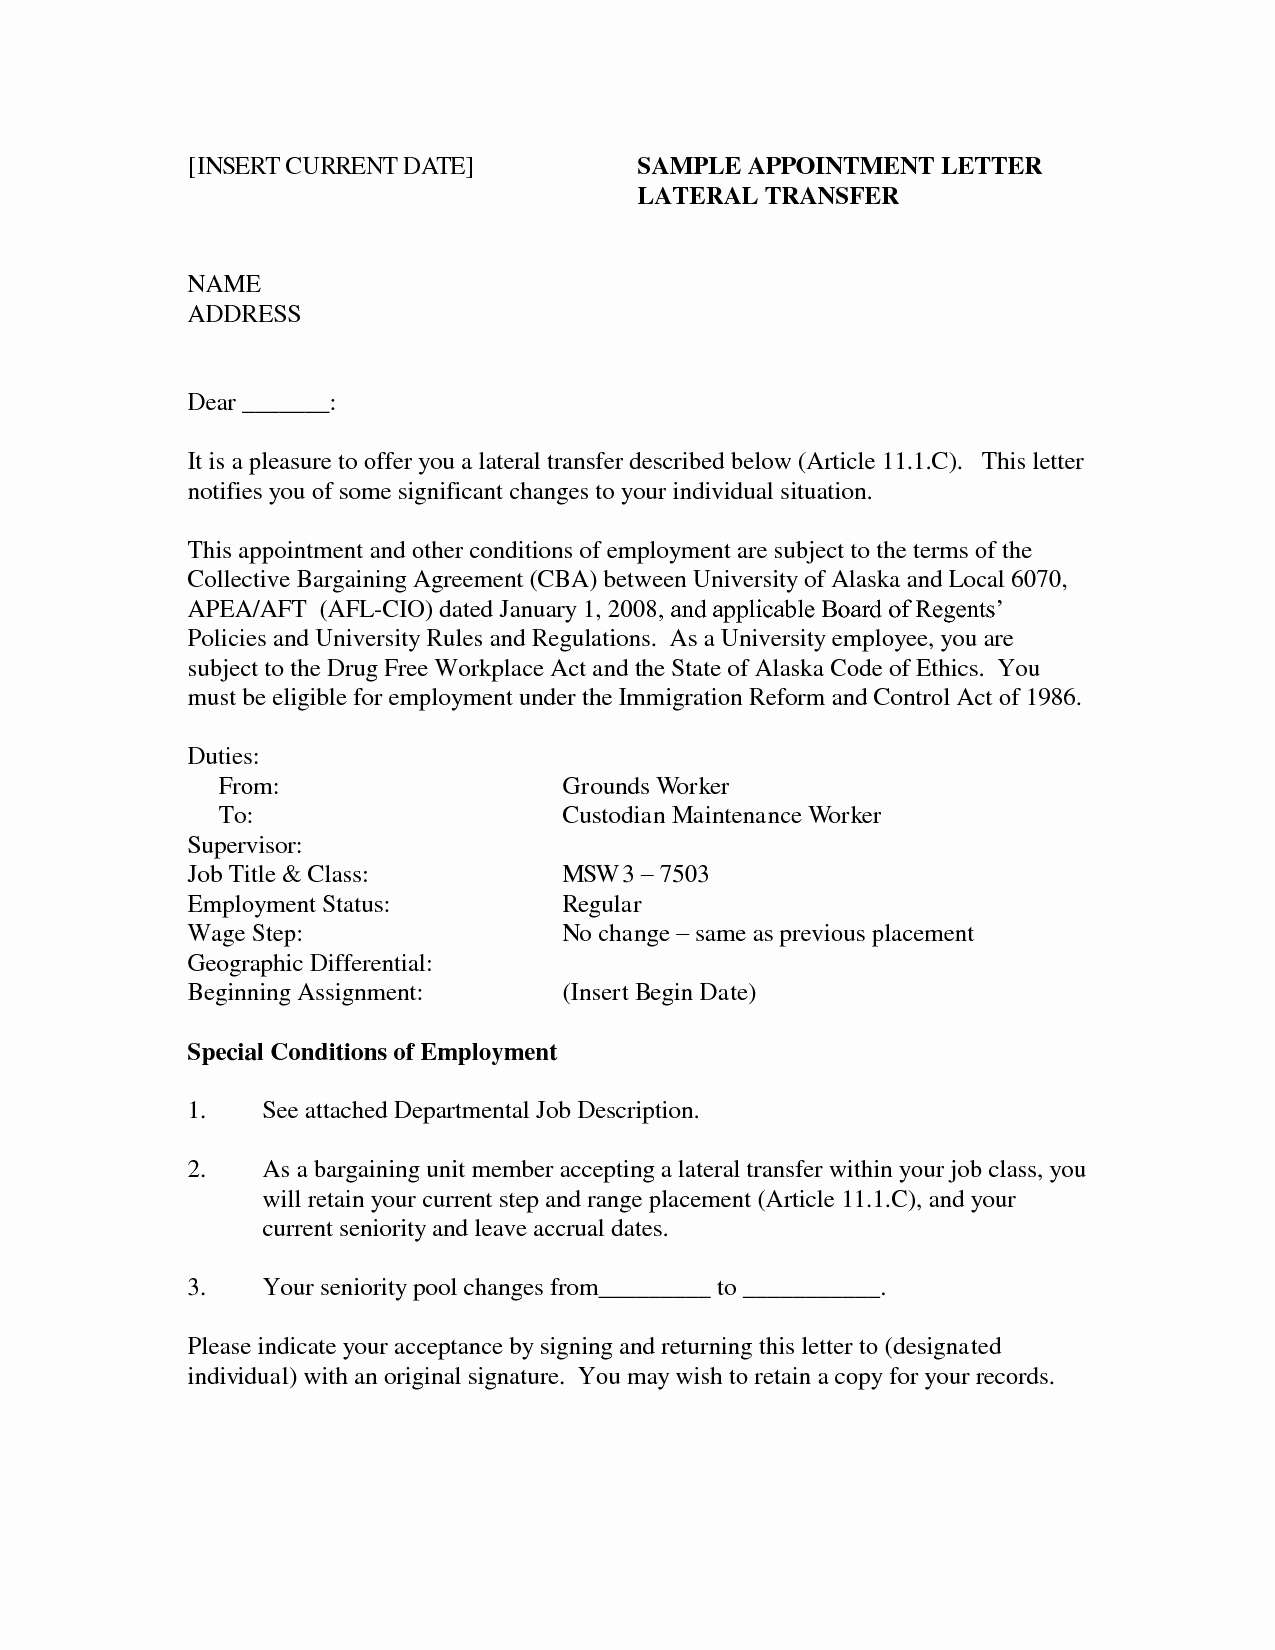 Email Cover Letter Template - Sample Email to Send Resume for Job Beautiful Cover Letter Template